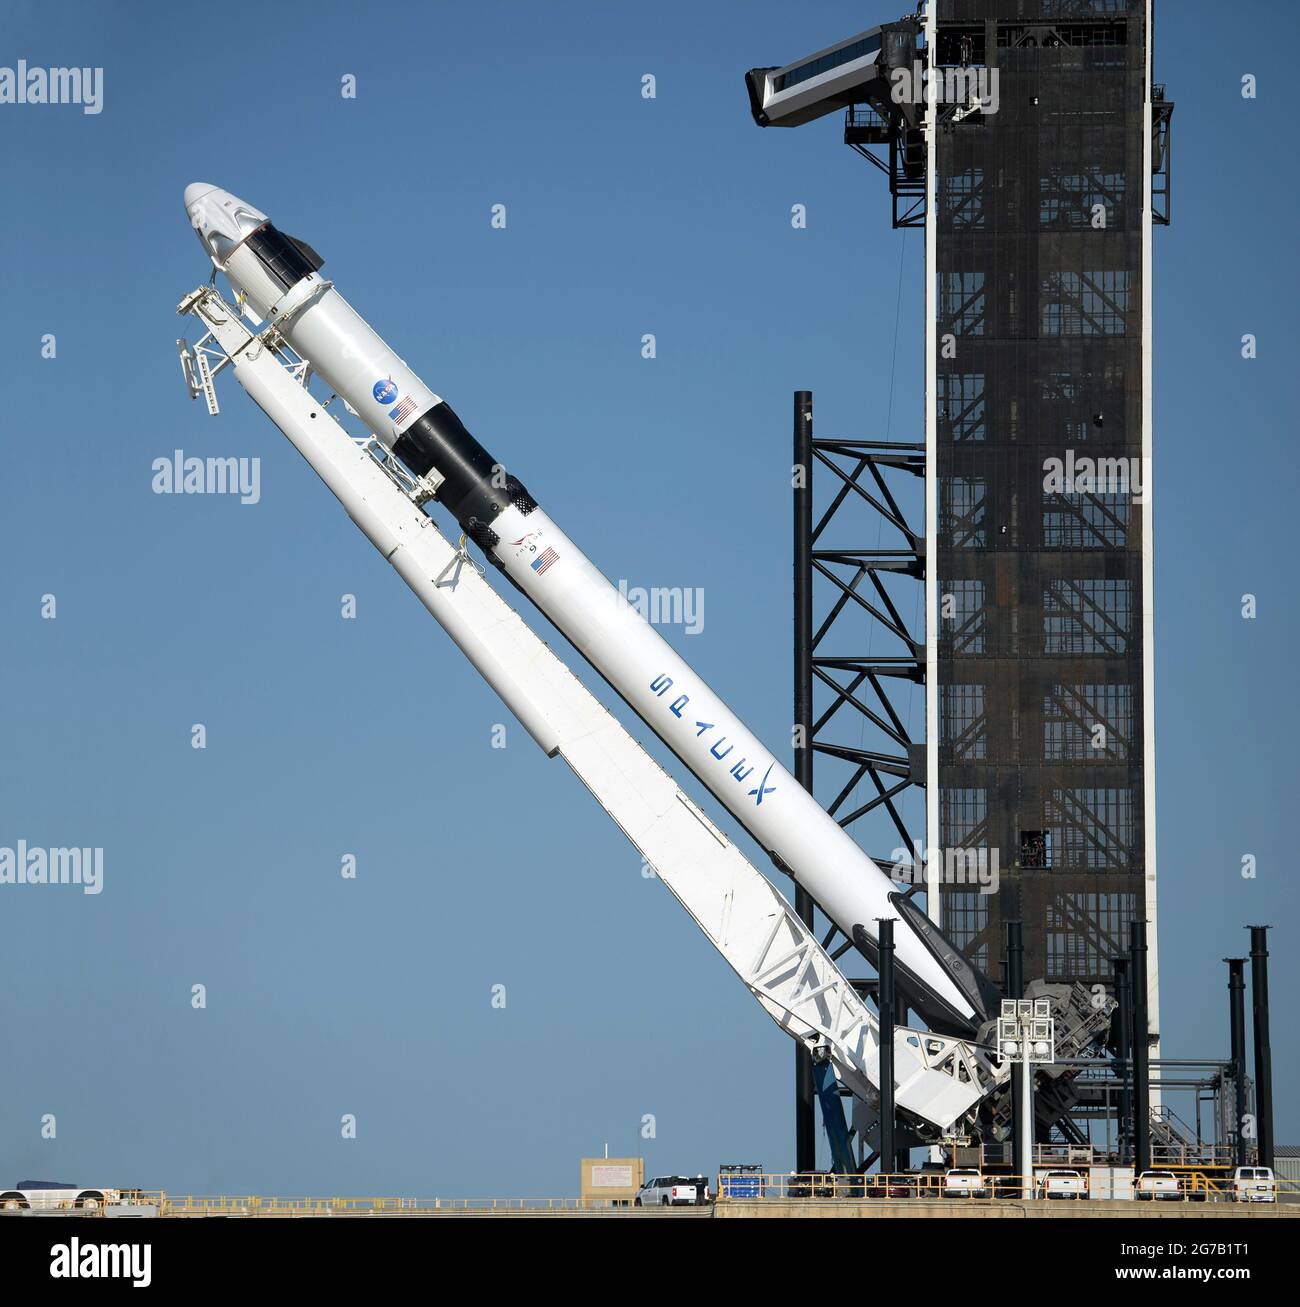 A SpaceX Falcon 9 rocket with the company's Crew Dragon spacecraft onboard is seen as it is lifted into a vertical position on the launch pad for the impending Demo-2 mission, 21 May 2020. Kennedy Space Center, Florida, USA. NASA's SpaceX Demo-2 mission is the first launch with astronauts of the SpaceX Crew Dragon spacecraft and Falcon 9 rocket to the International Space Station.   A unique, optimised and digitally enhanced version of an NASA image by senior NASA photographer Bill Ingalis / credit NASA Stock Photo